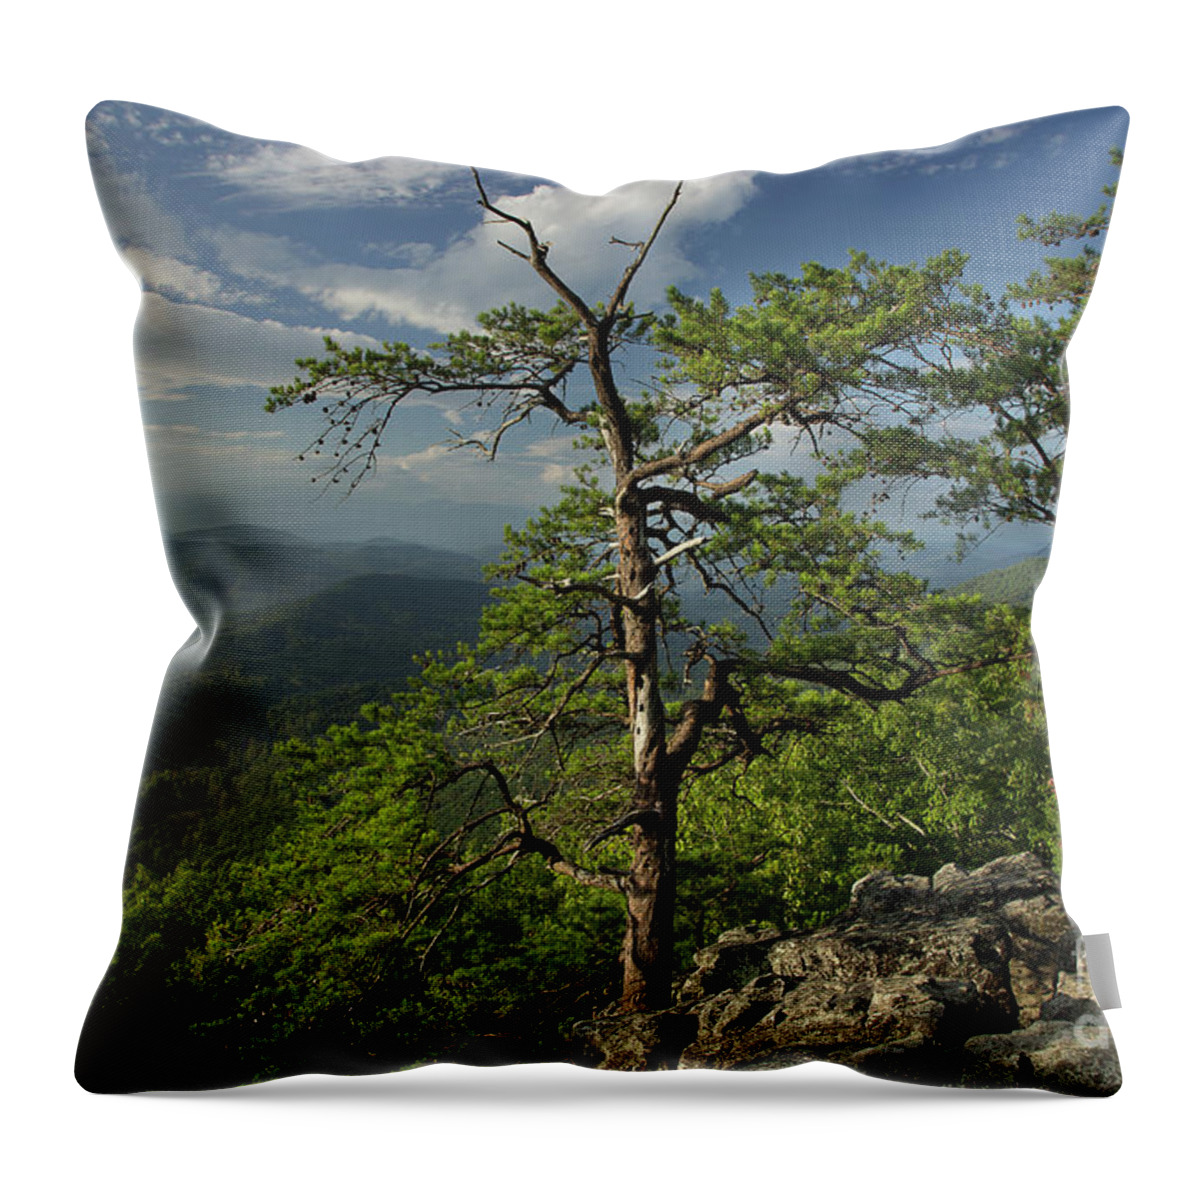 Sunrise Throw Pillow featuring the photograph Fresh Mountain Morning by Mike Eingle